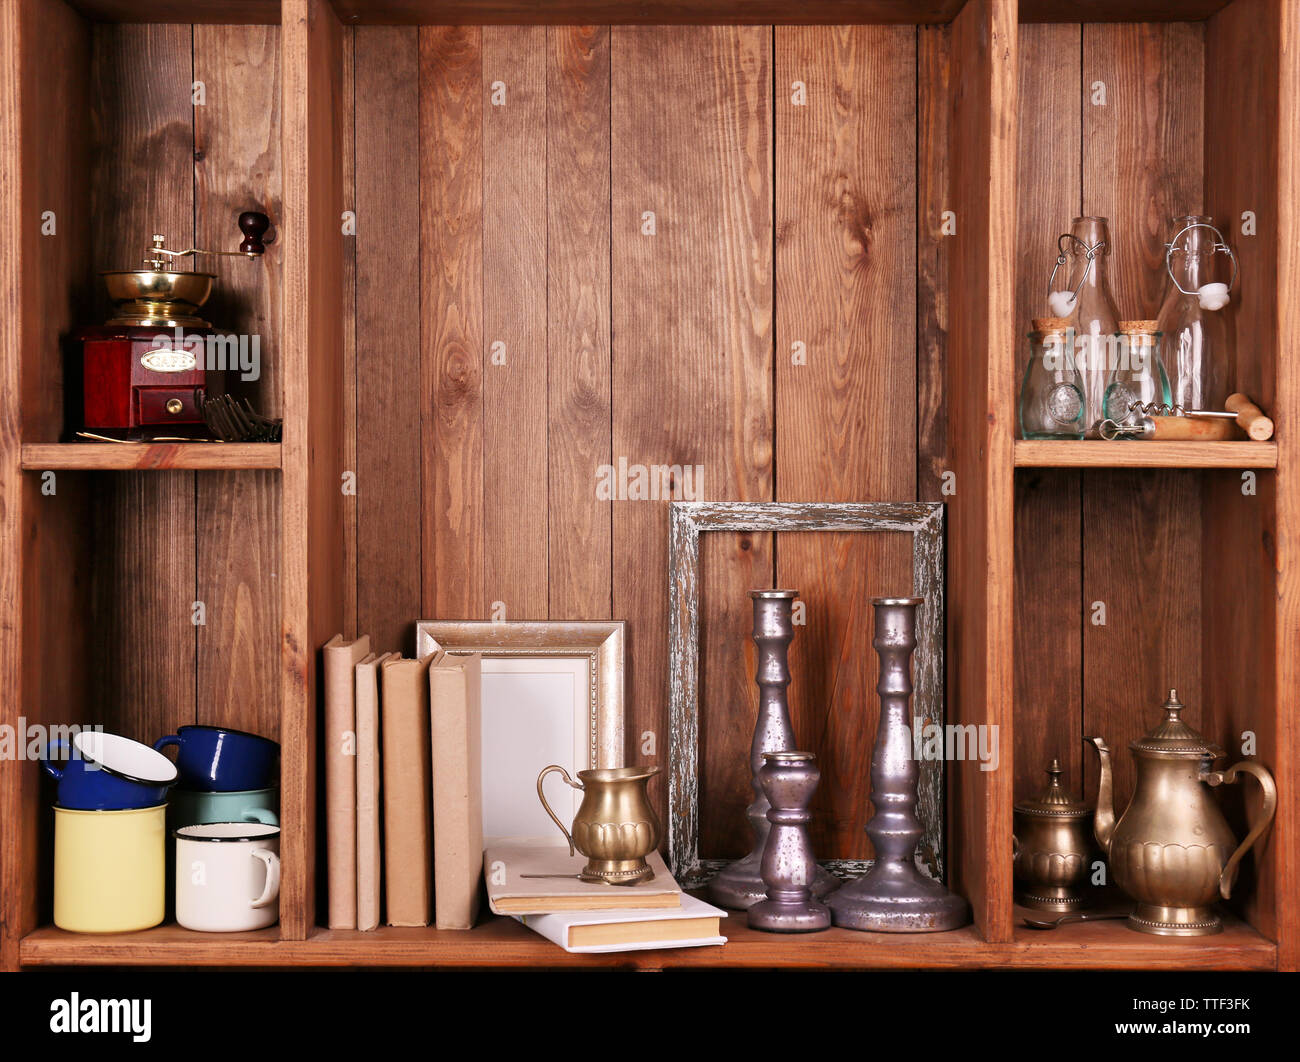 Wooden shelves with antiques things Stock Photo